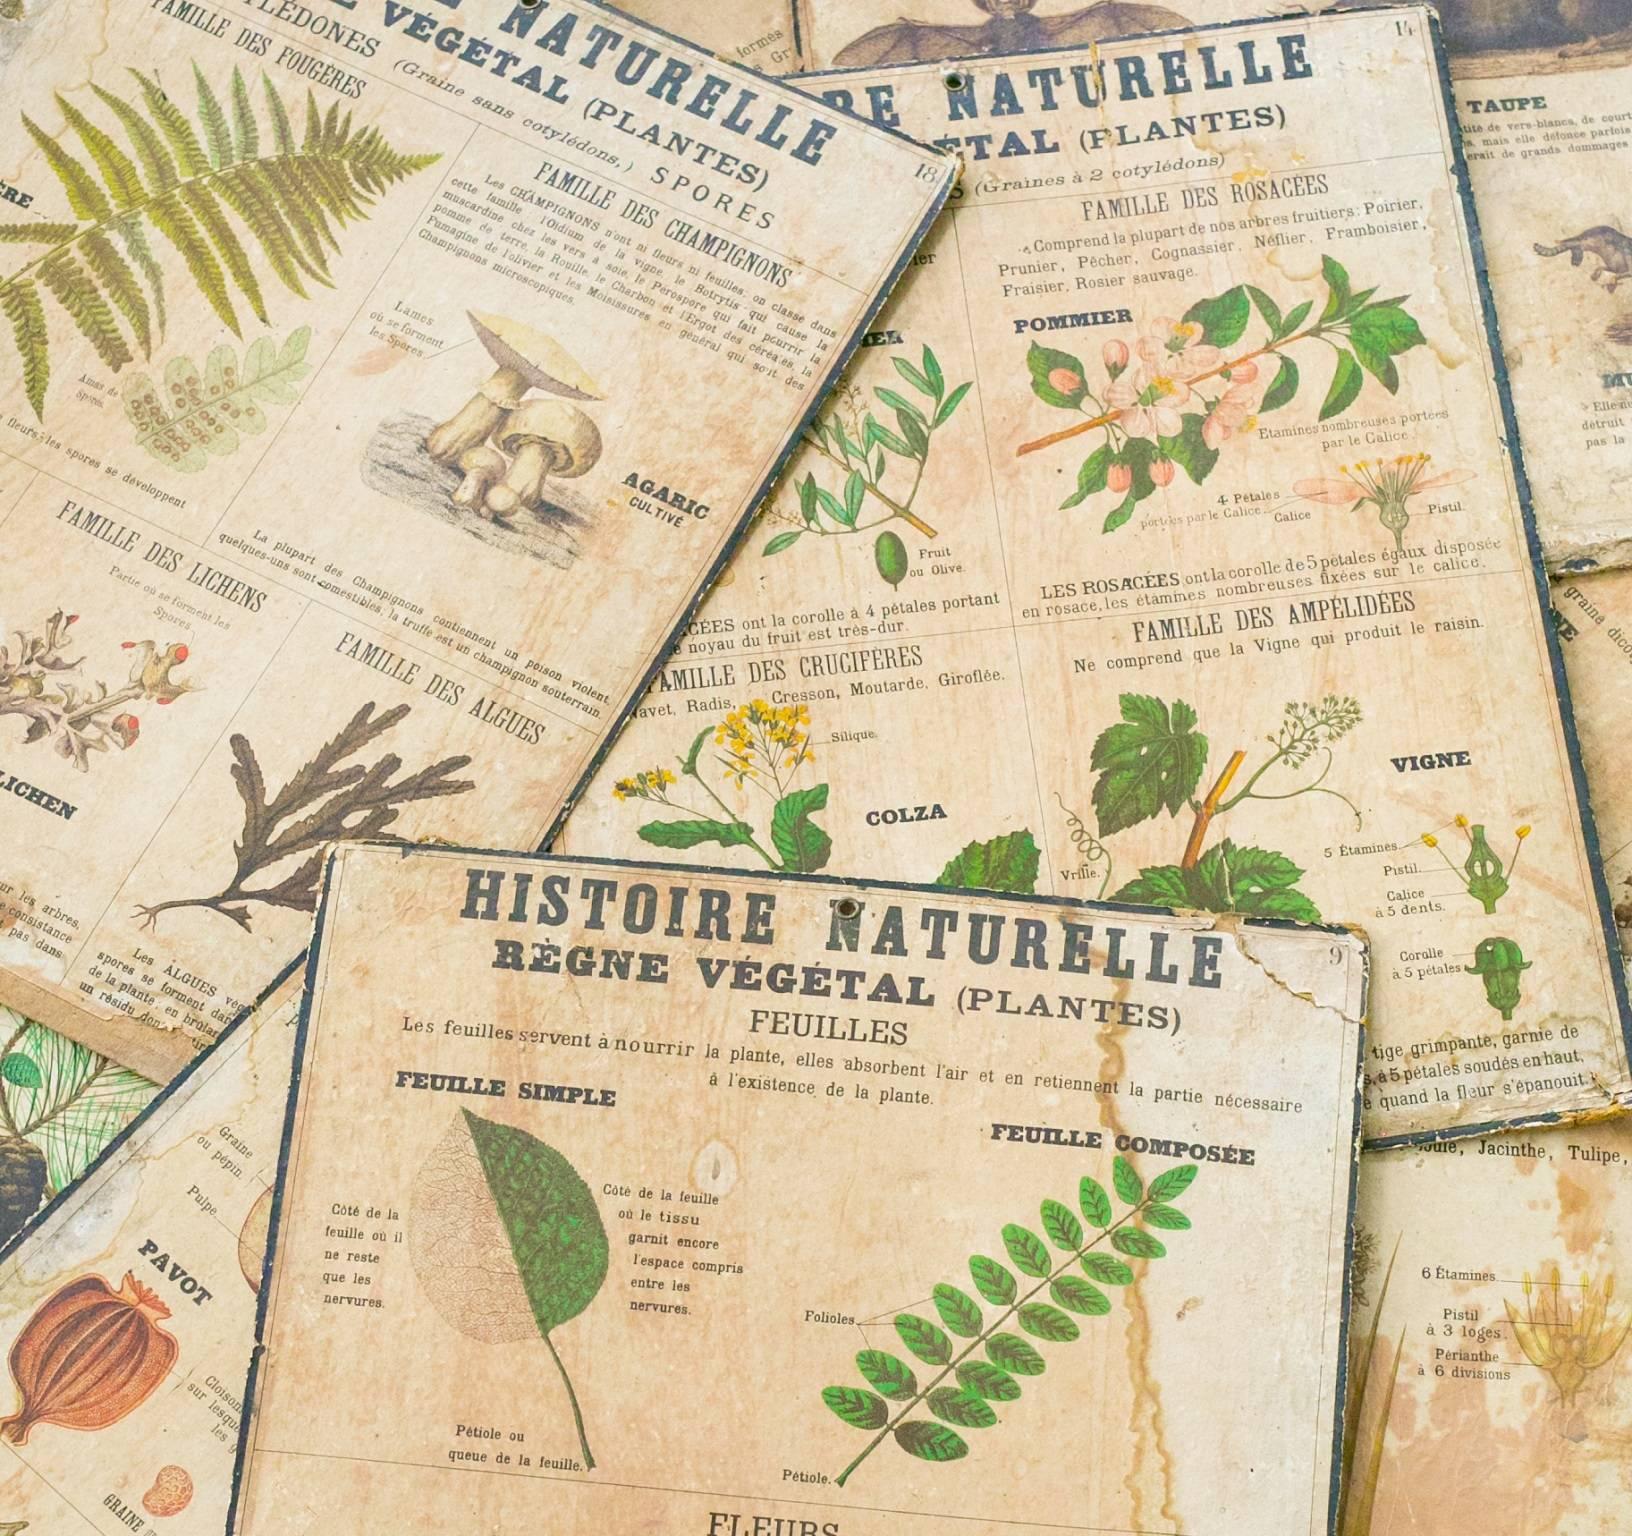 Set of 9 antique cardboard teaching posters from Belgium, printed in French.  From the Histoire Naturelle Collection, printed by A.N. Lebegue Et Cie in Brussels.  Assorted subject matter including plants, vegetables and animals.  Good vintage